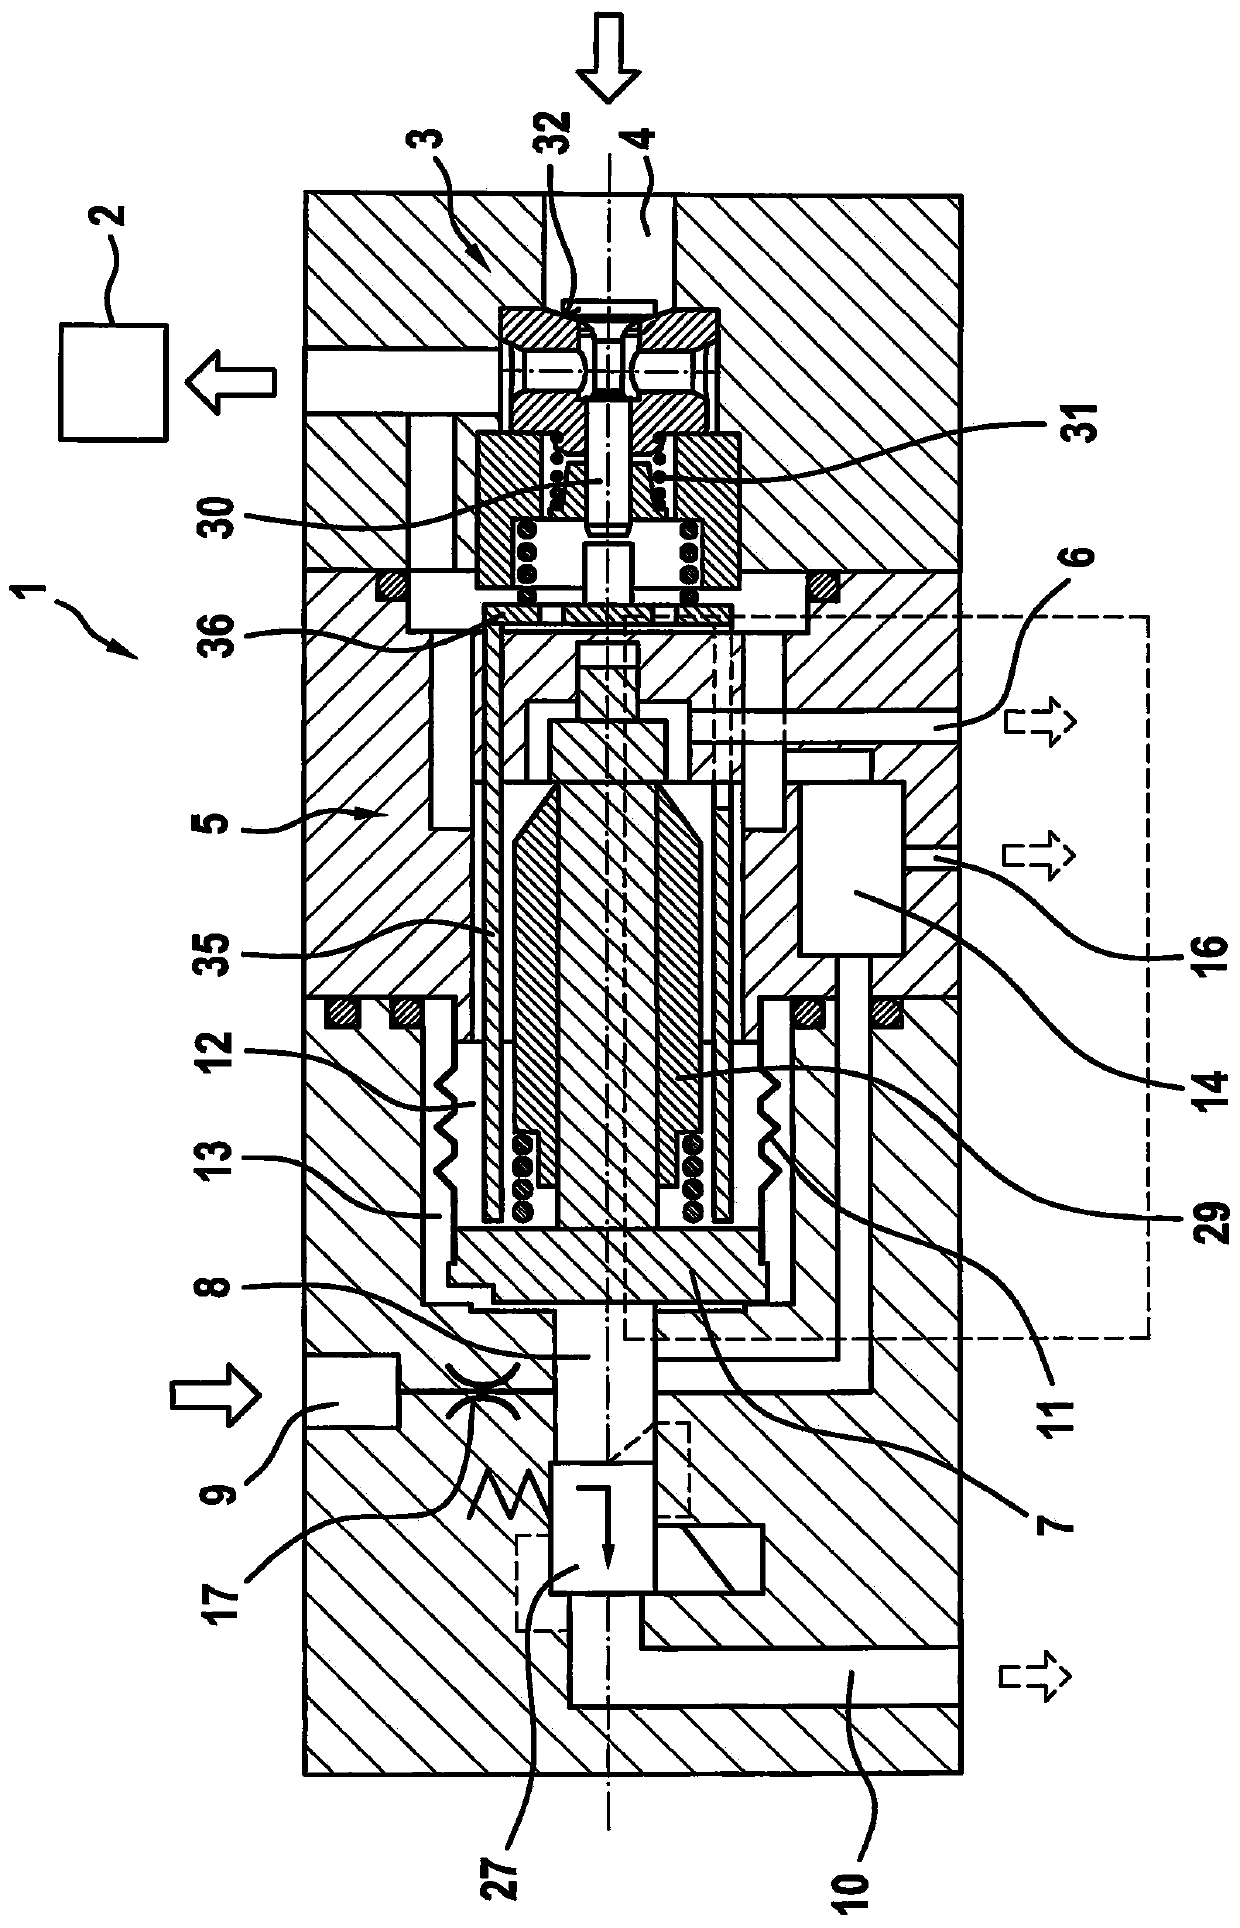 Valve assembly for controlling gas pressure, fuel system comprising valve assembly for controlling gas pressure